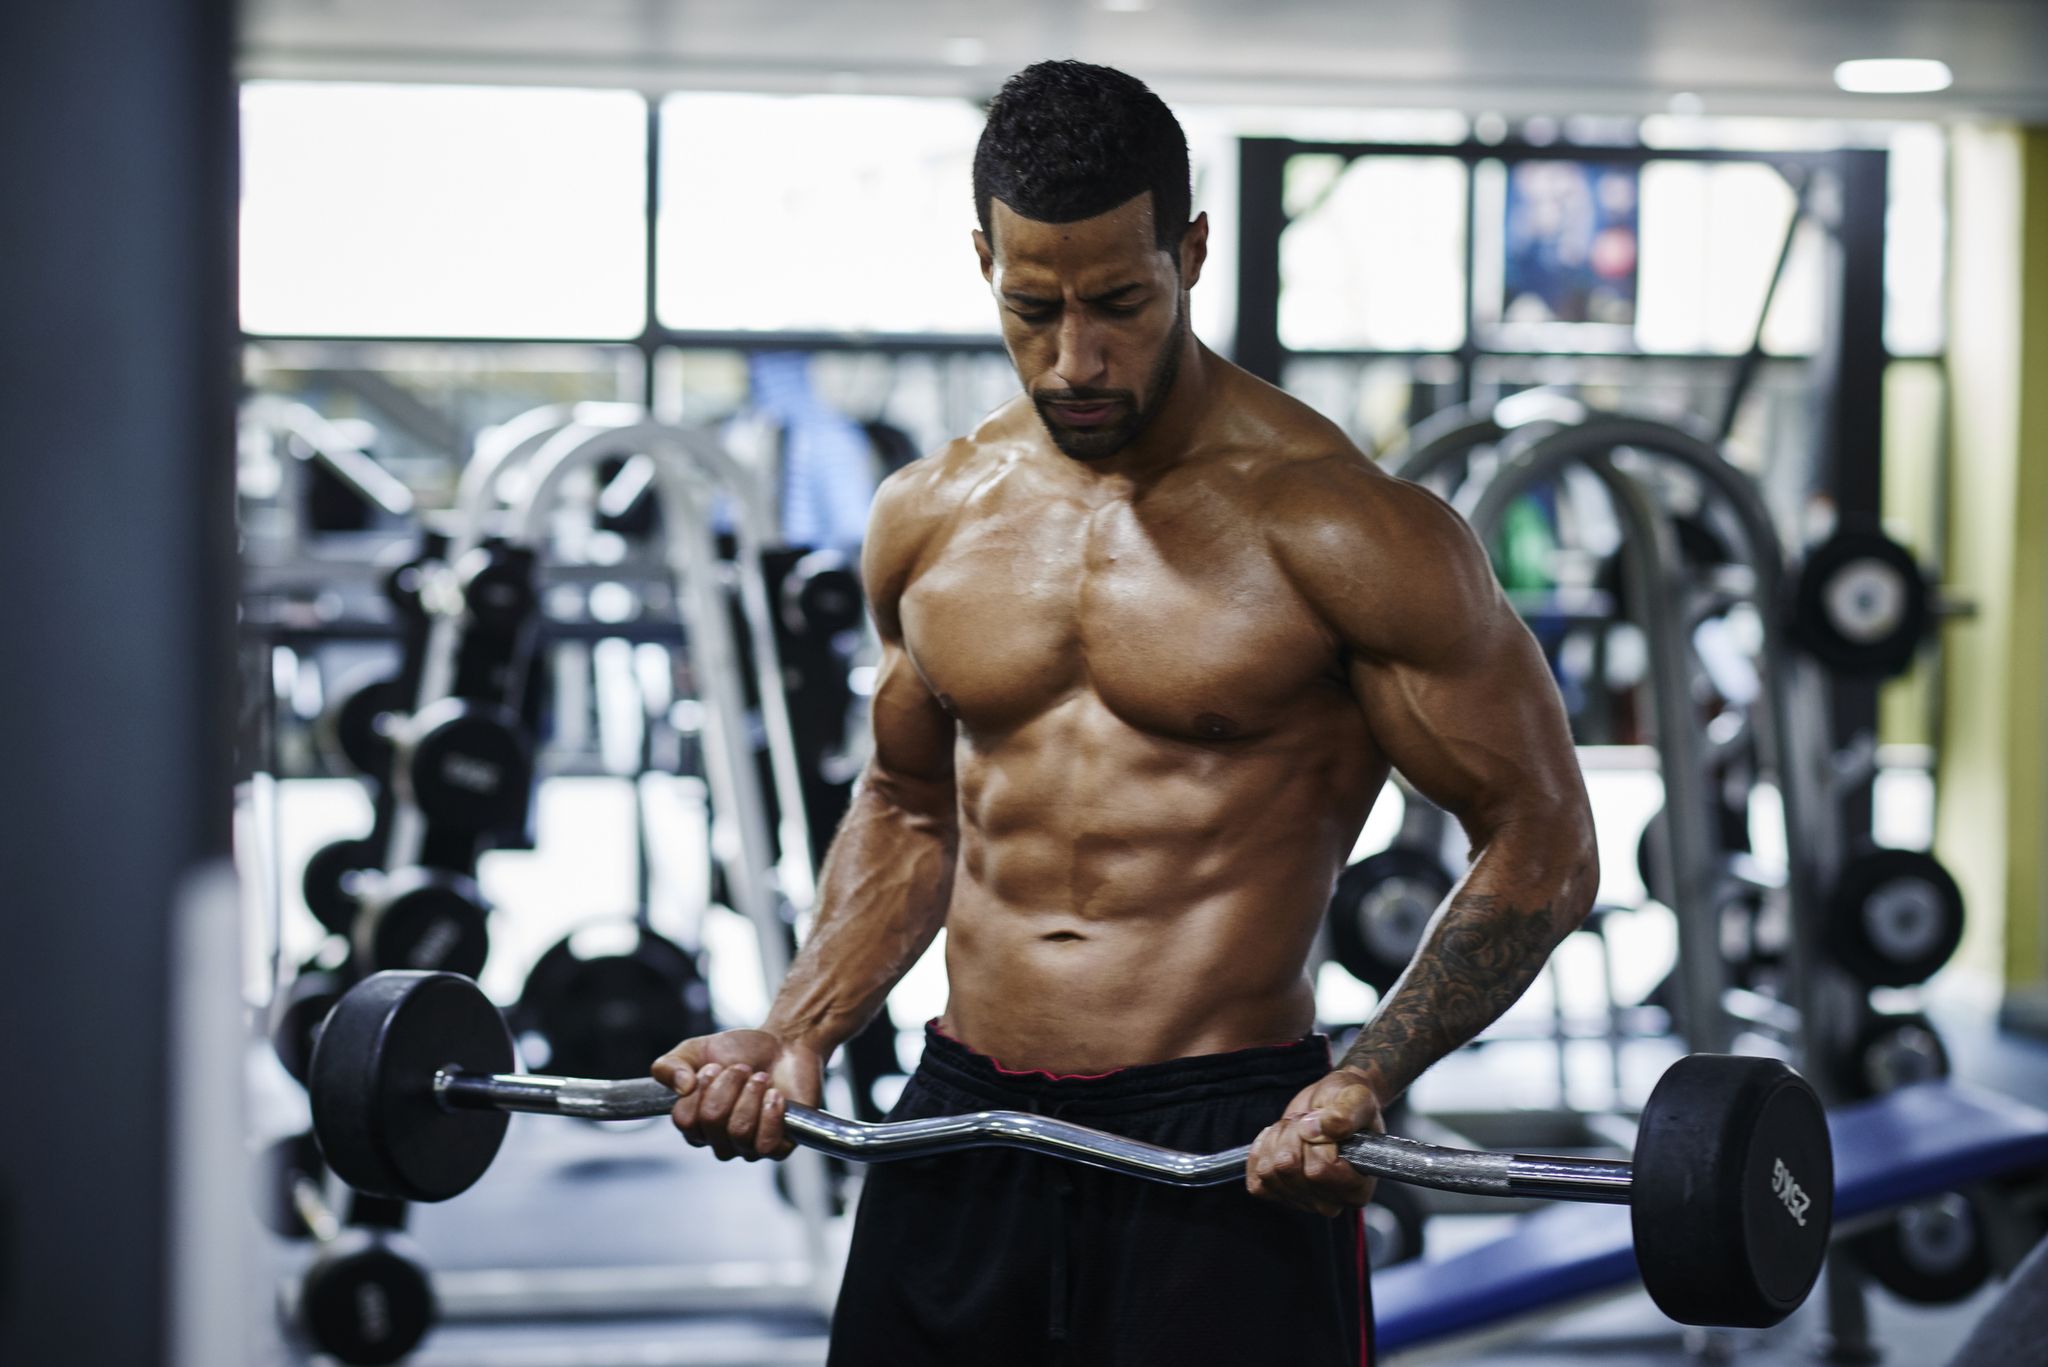 The High and Low Rep Workout Principle For Building Bigger Muscles